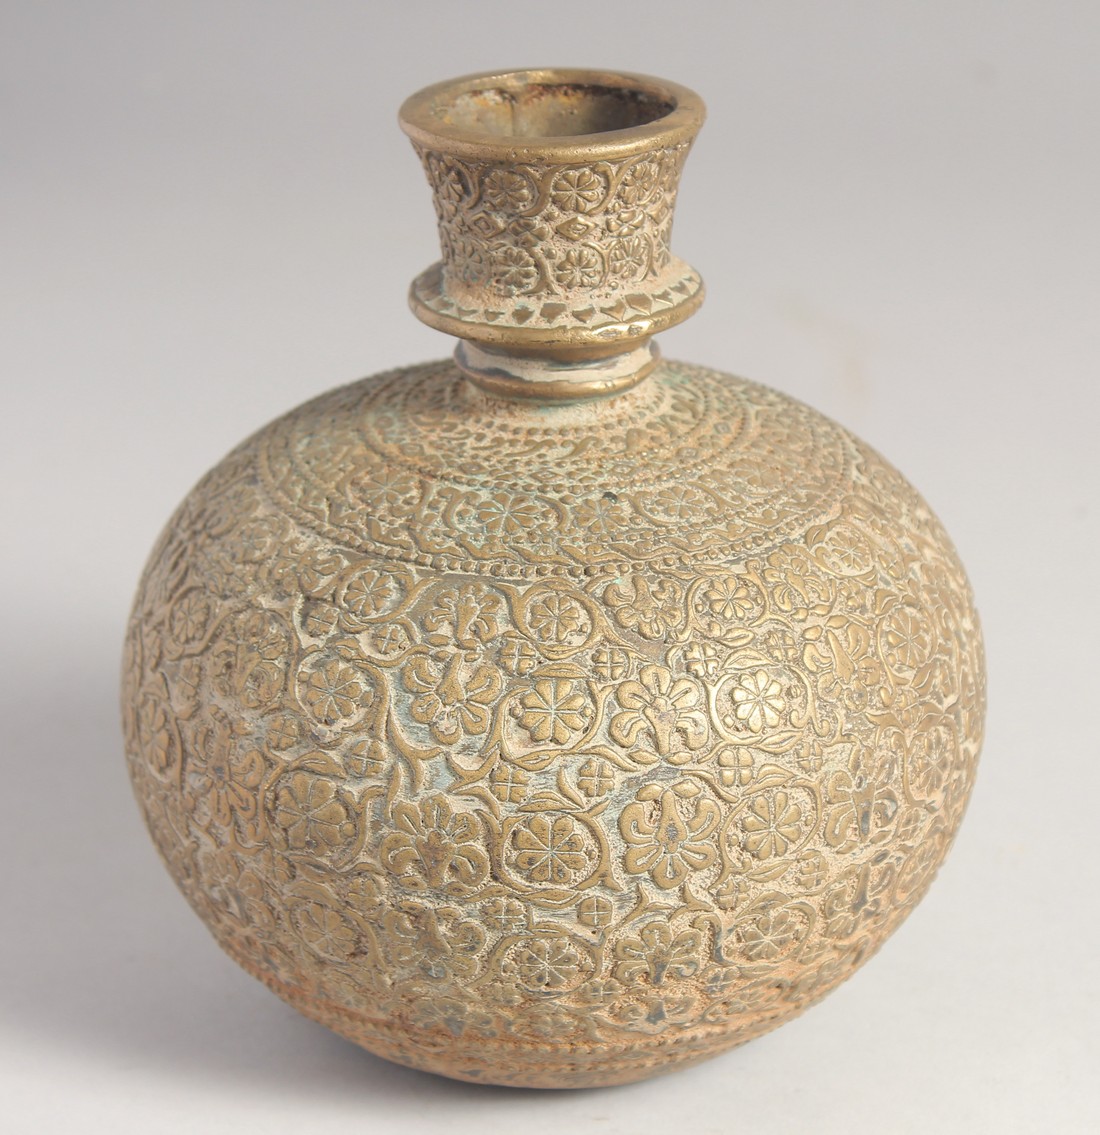 A FINE INDIAN BRASS BULBOUS HUQQA BASE, with floral motif decoration. 15cm high - Image 3 of 5